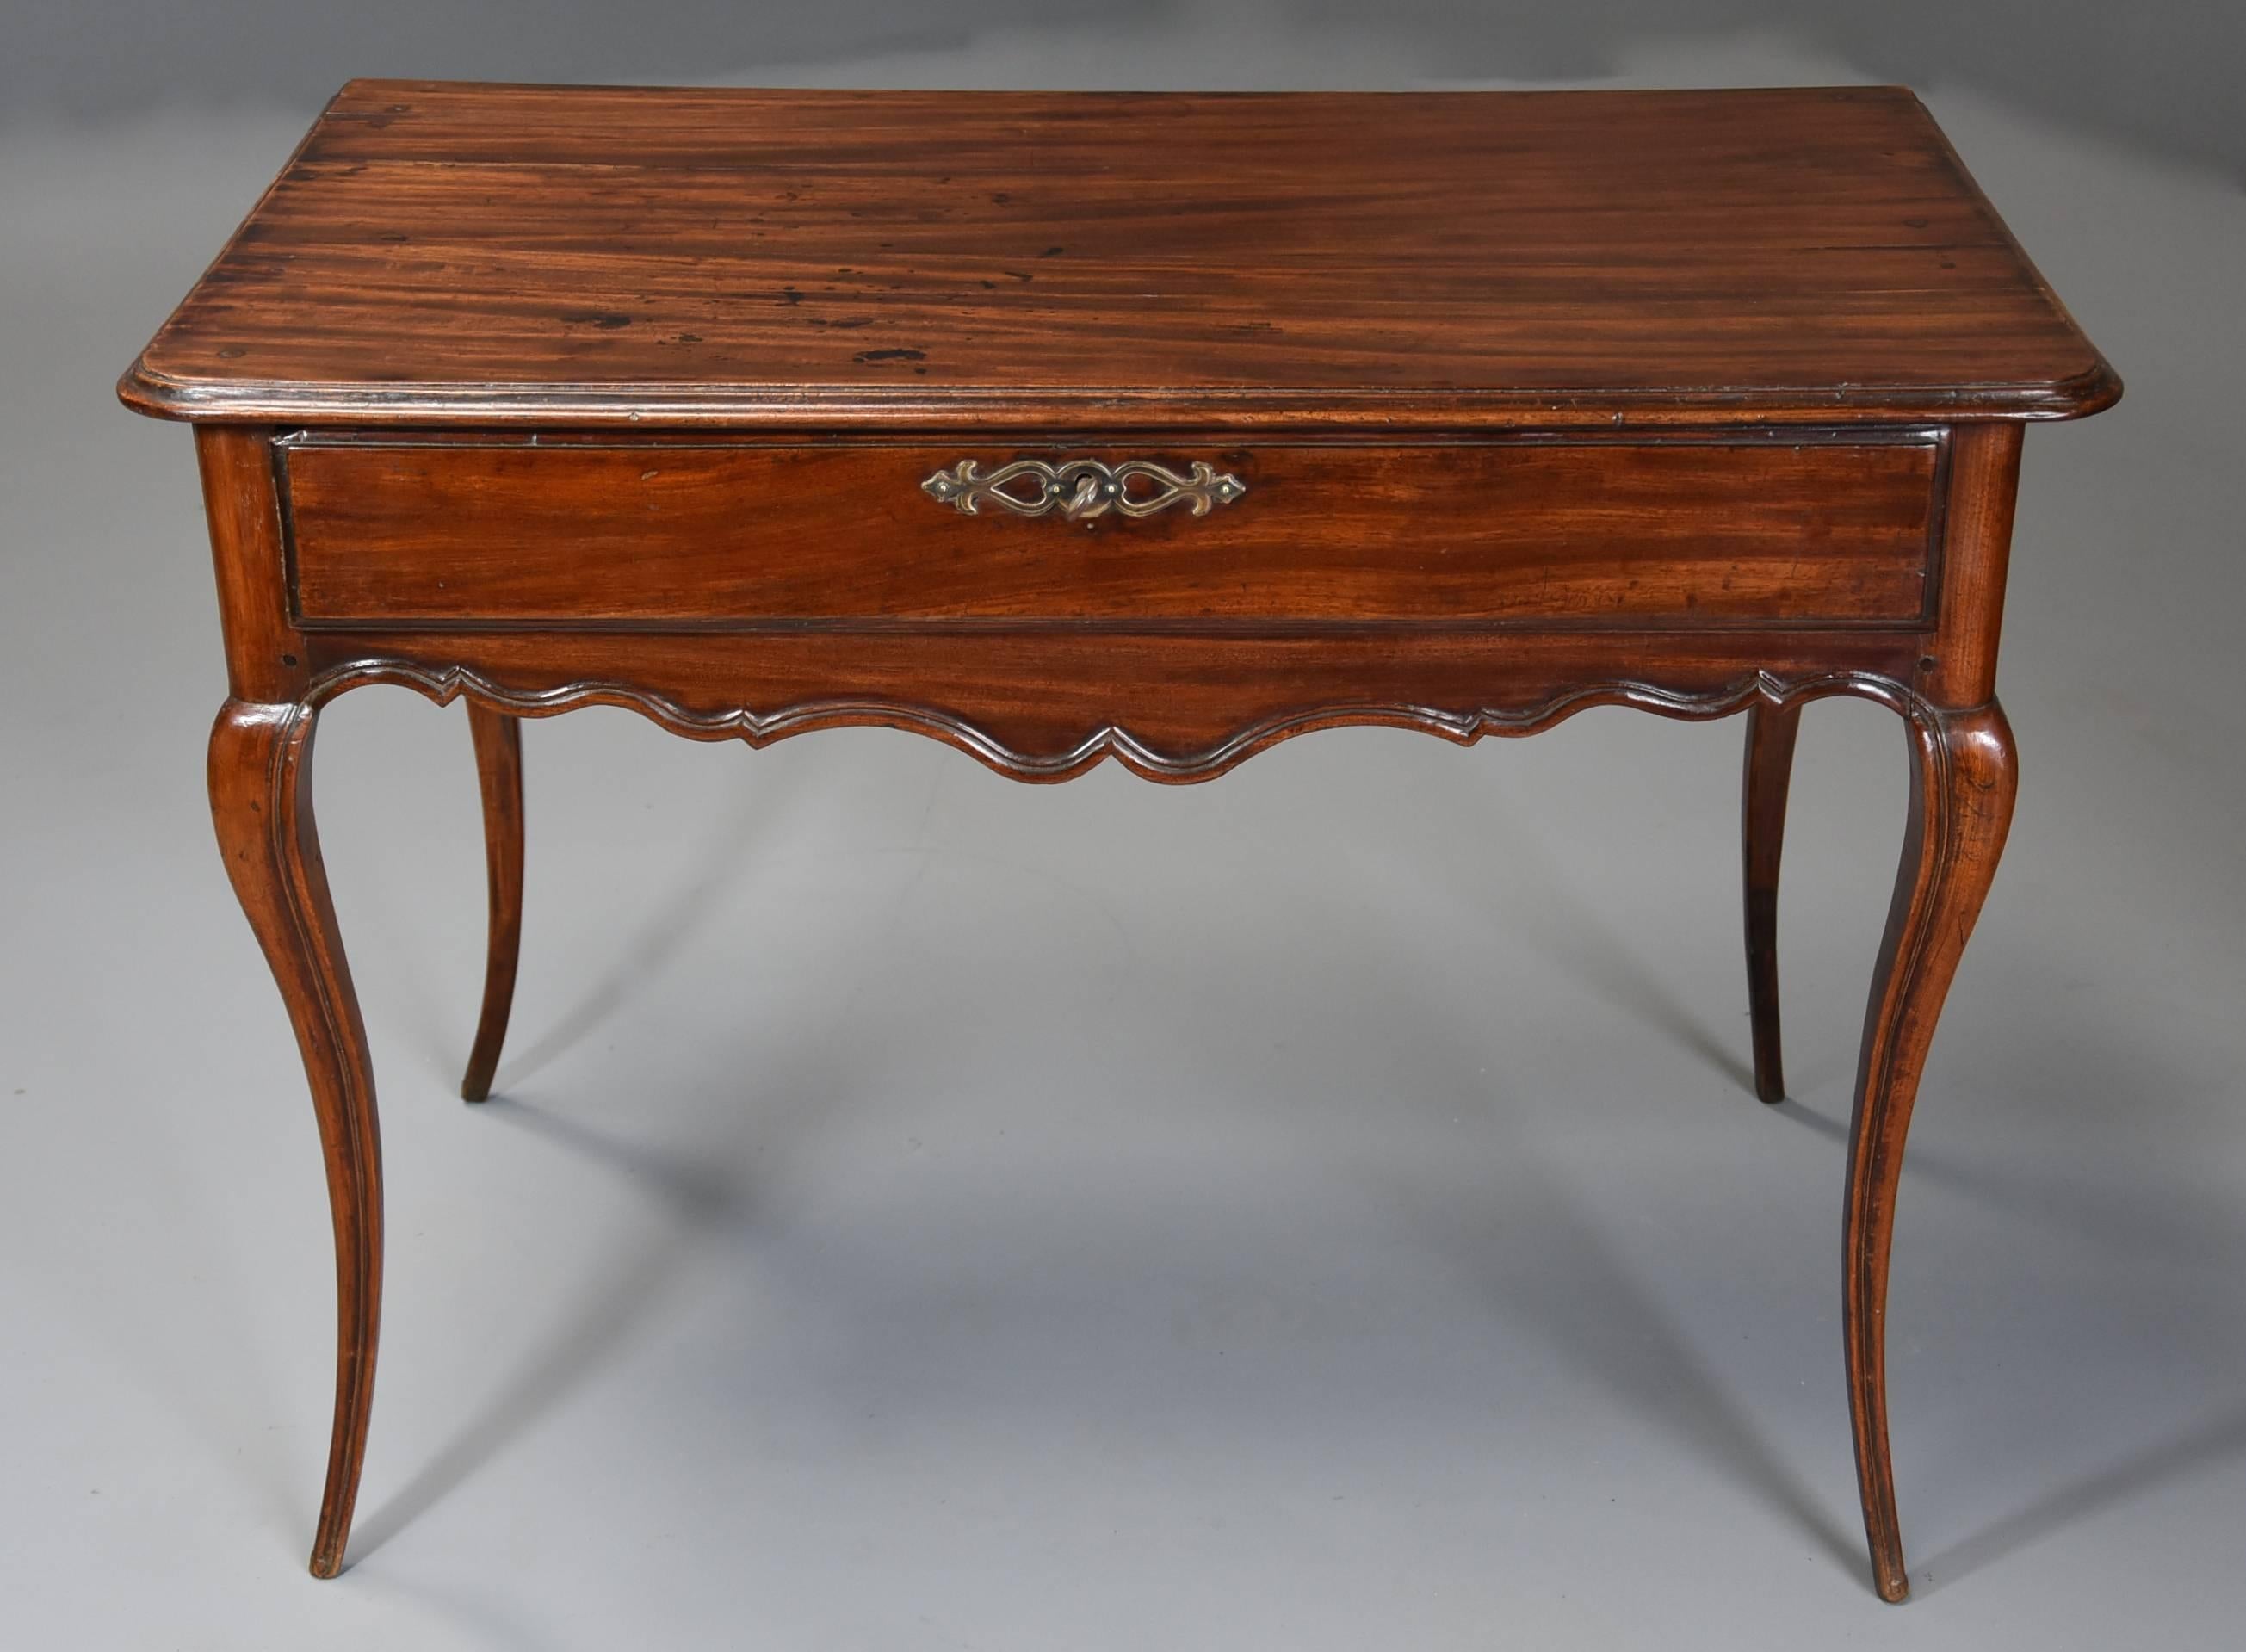 A late 18th-early 19th century (circa 1800) French walnut side table with superb original rich patina (color).

This table consists of a finely figured walnut top with a moulded edge.

This leads down to a long pine lined walnut drawer also with